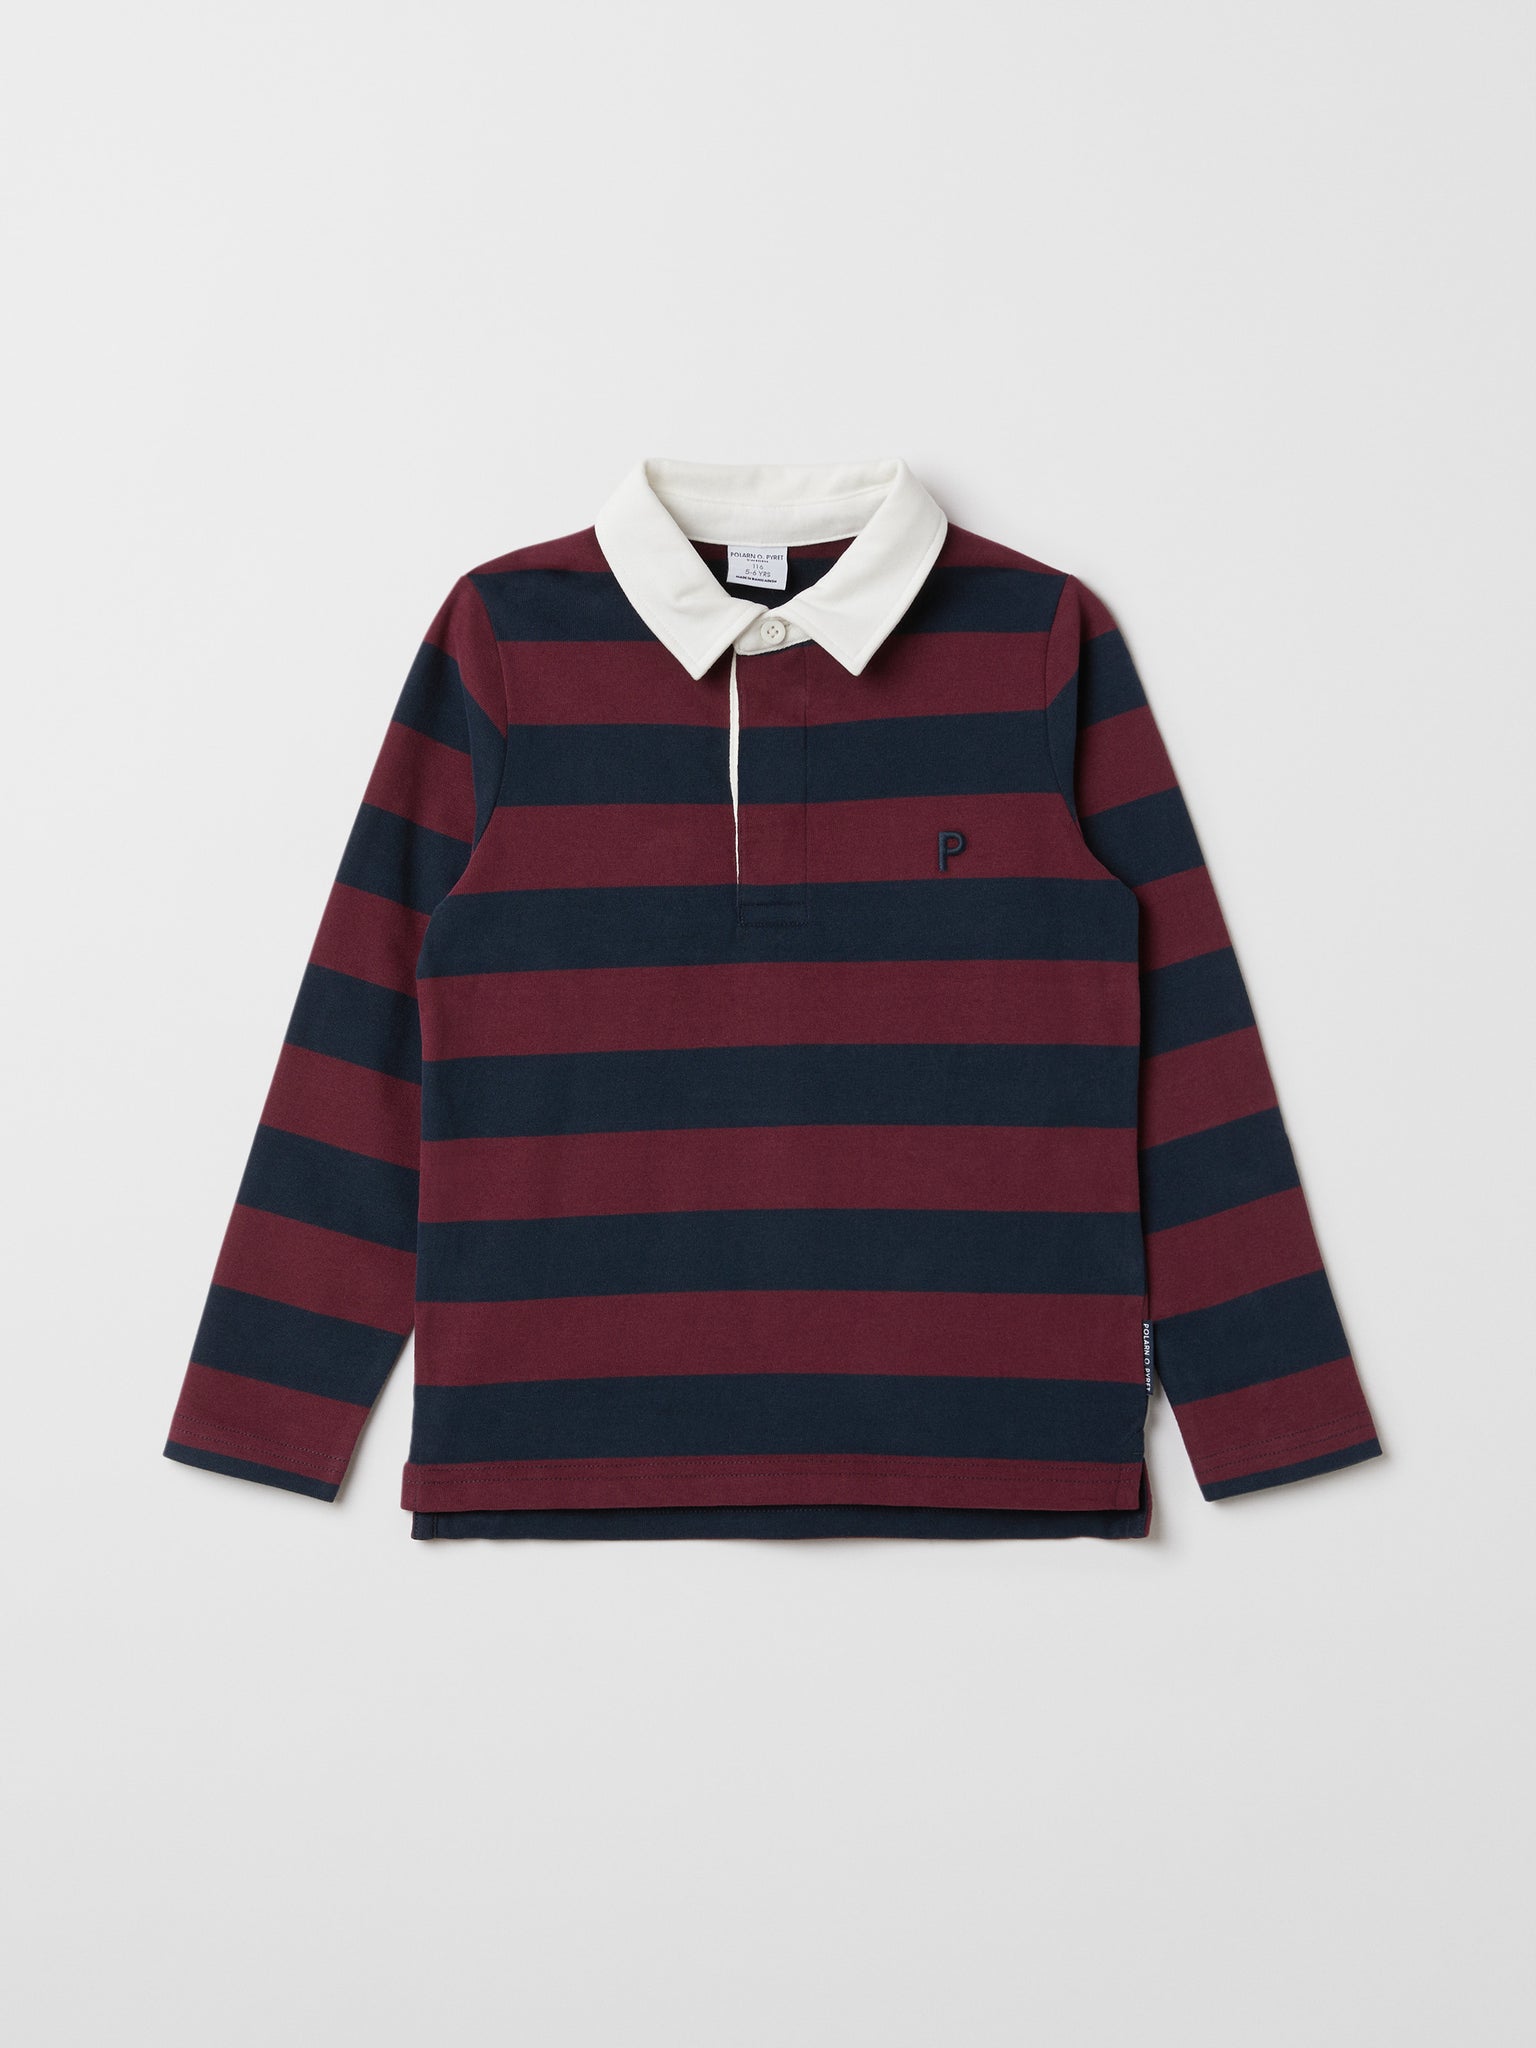 Organic Cotton Kids Rugby Shirt from the Polarn O. Pyret kidswear collection. Nordic kids clothes made from sustainable sources.